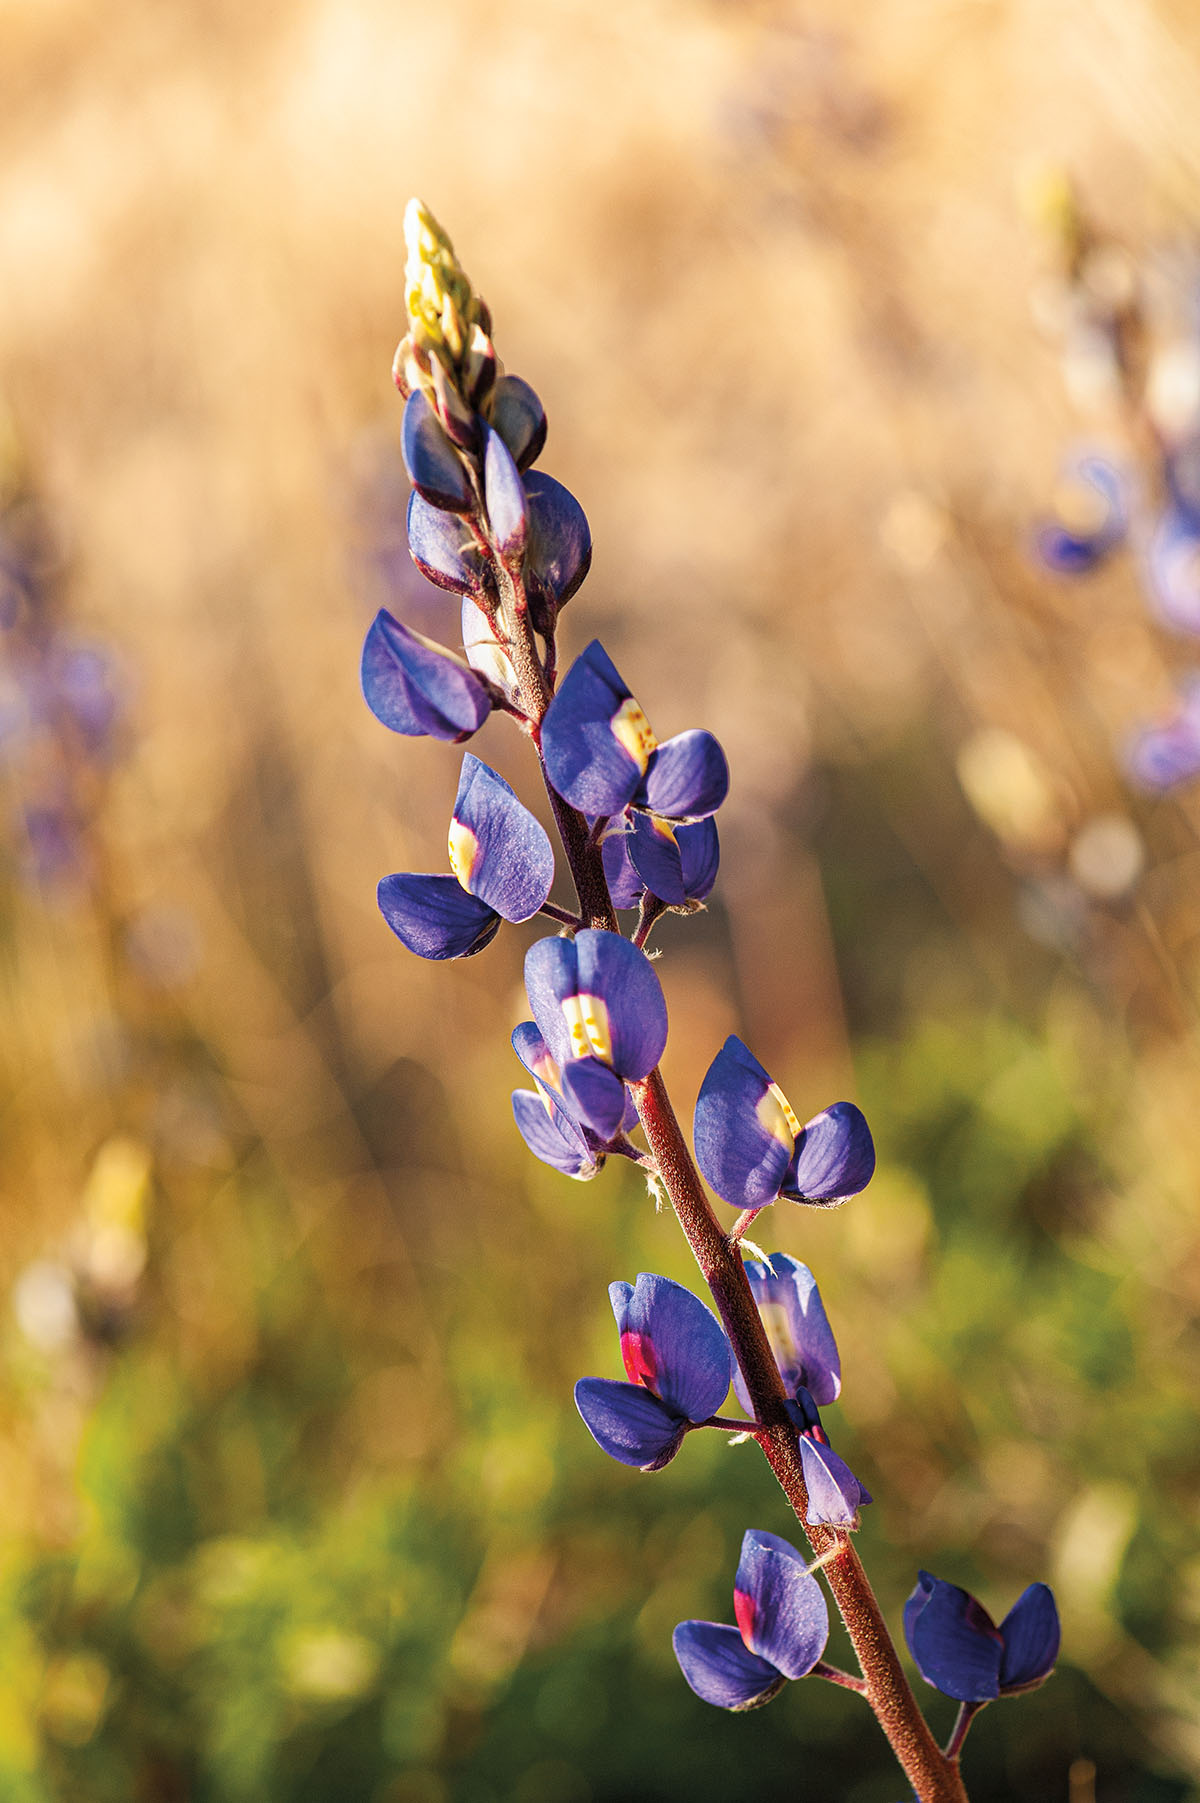 A bright blue bluebonnet on a brown stem in front of a blurred background